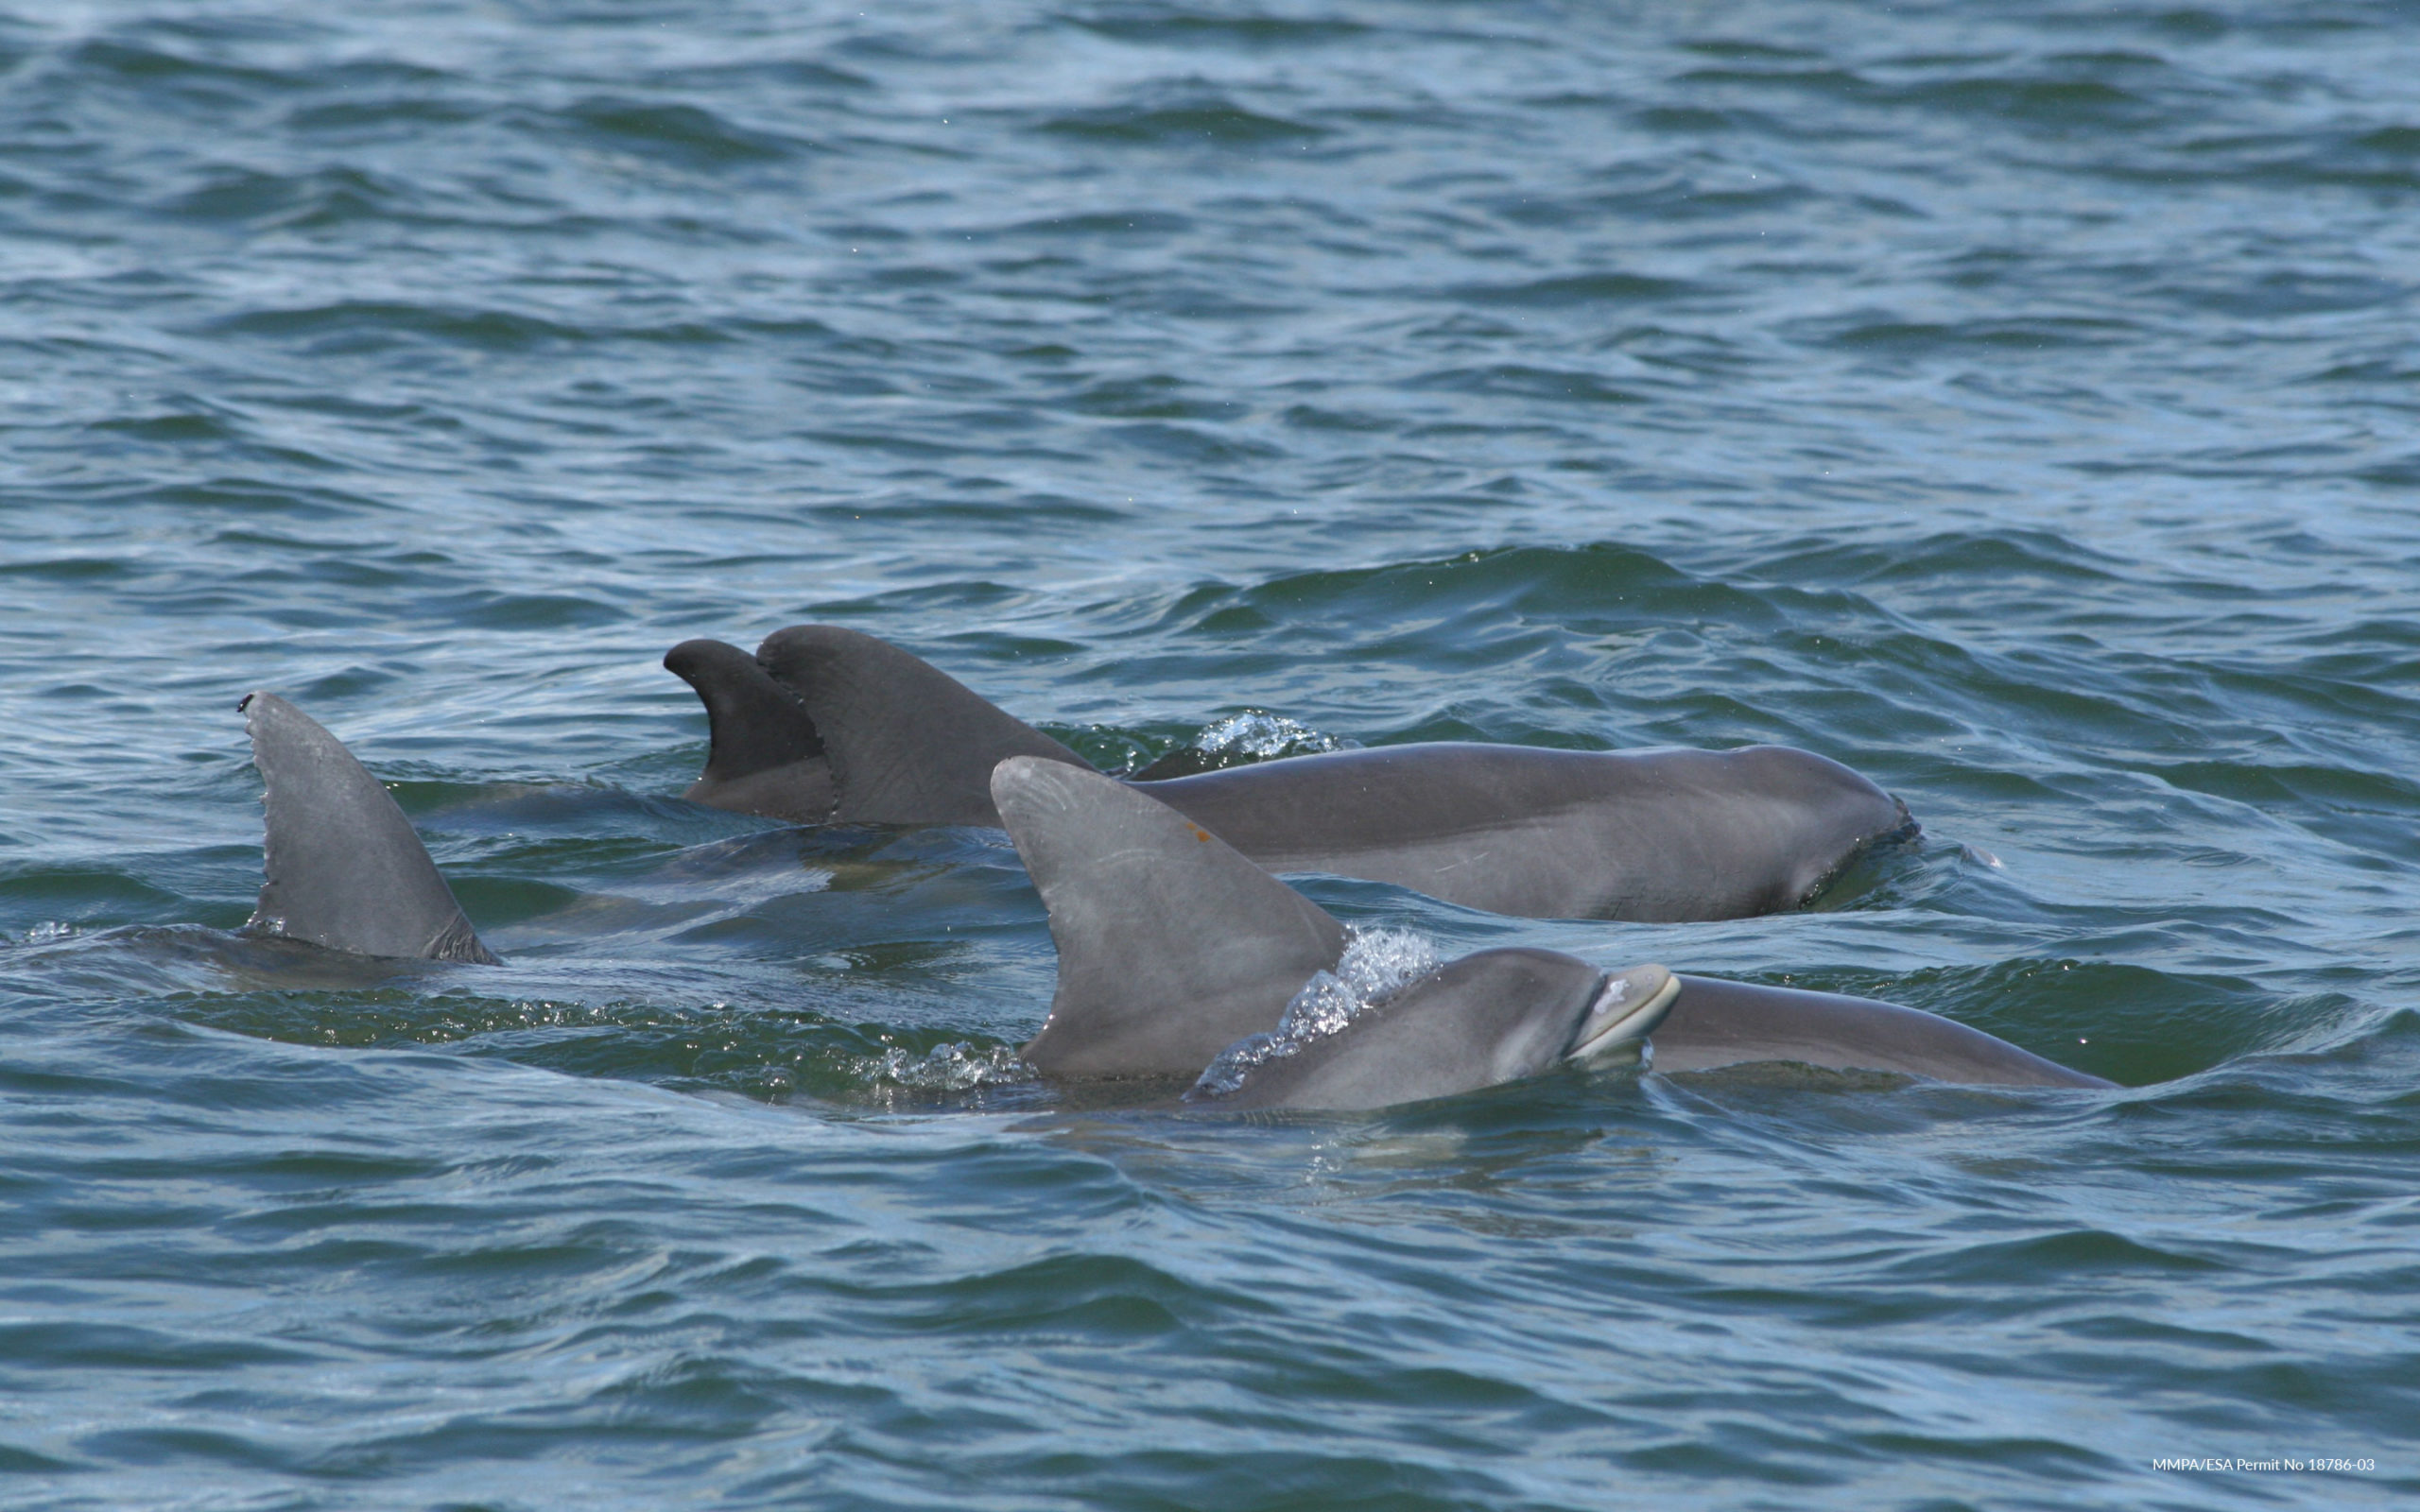 A group of dolphins photographed by NMMF researchers as part of follow-up surveys to study reproductive and survival outcomes. The unique shape and pattern of notches in the dorsal fins allow for the identification of specific individuals.